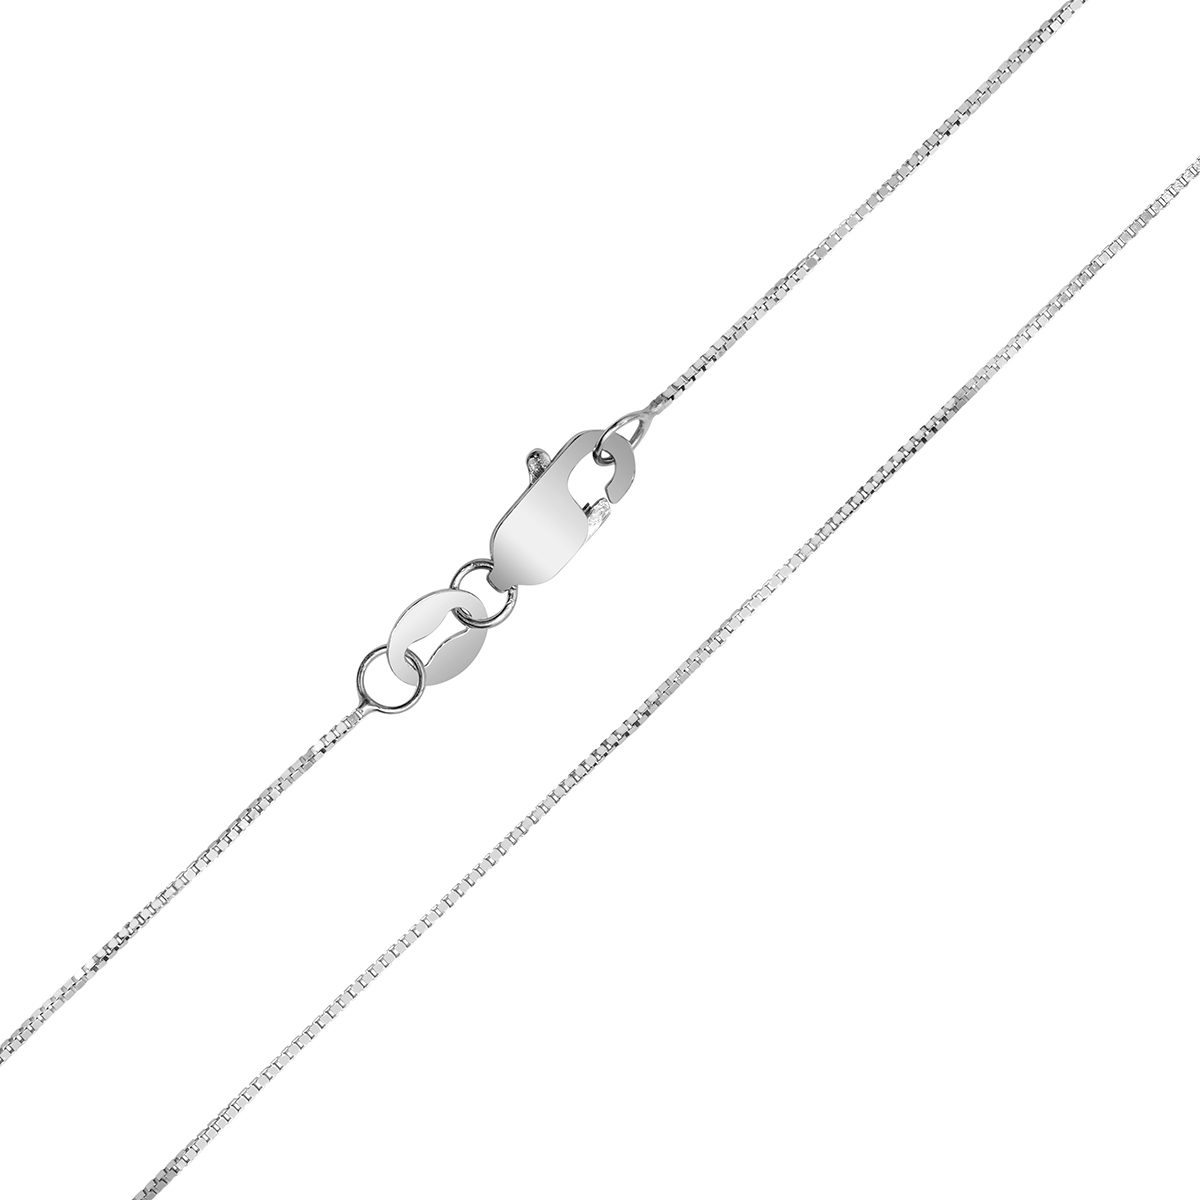 10K White Gold 0.45mm Box Chain with Lobster Clasp - 18 Inch